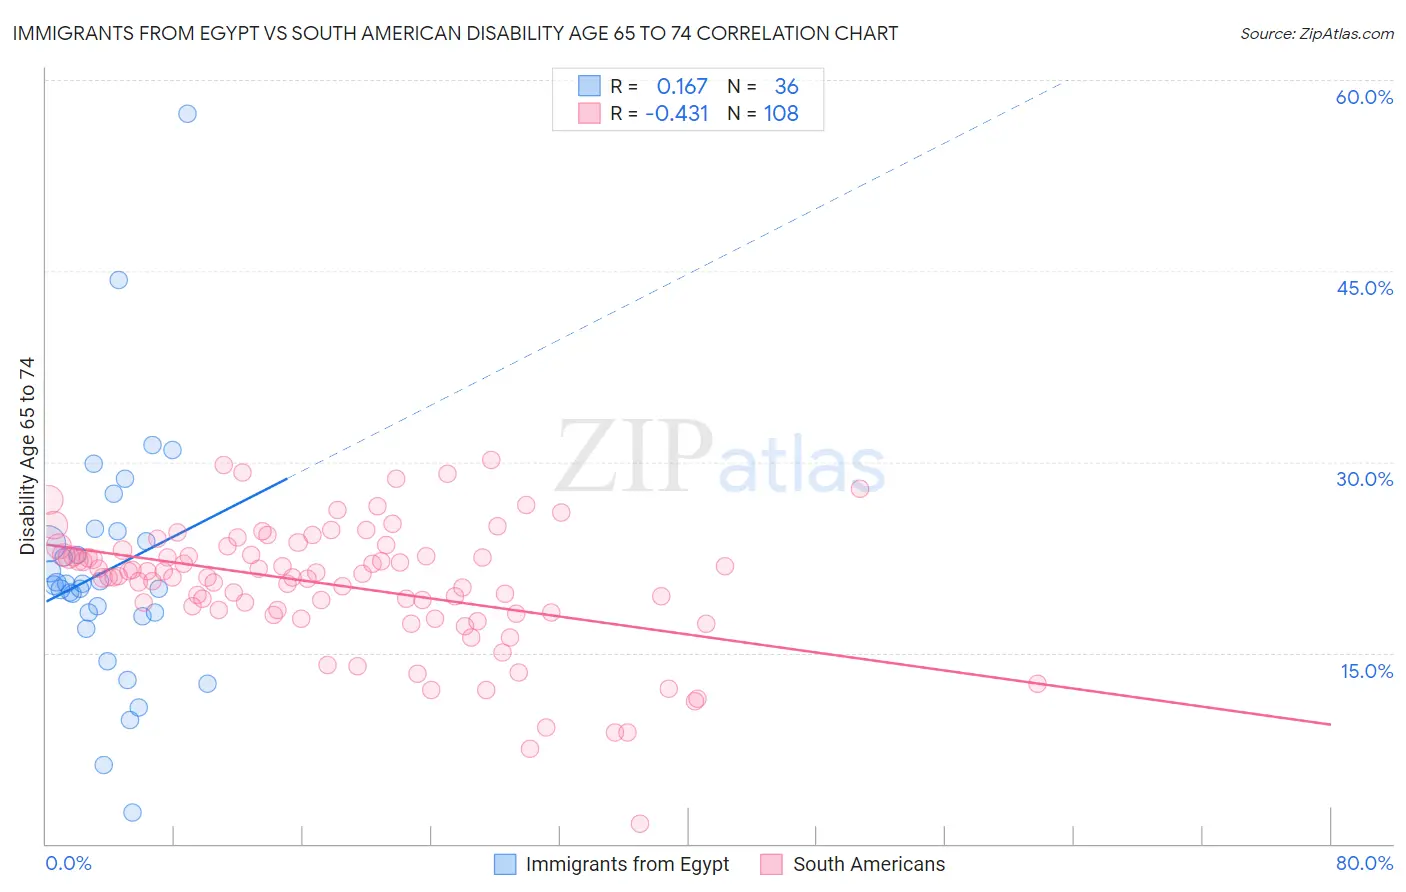 Immigrants from Egypt vs South American Disability Age 65 to 74